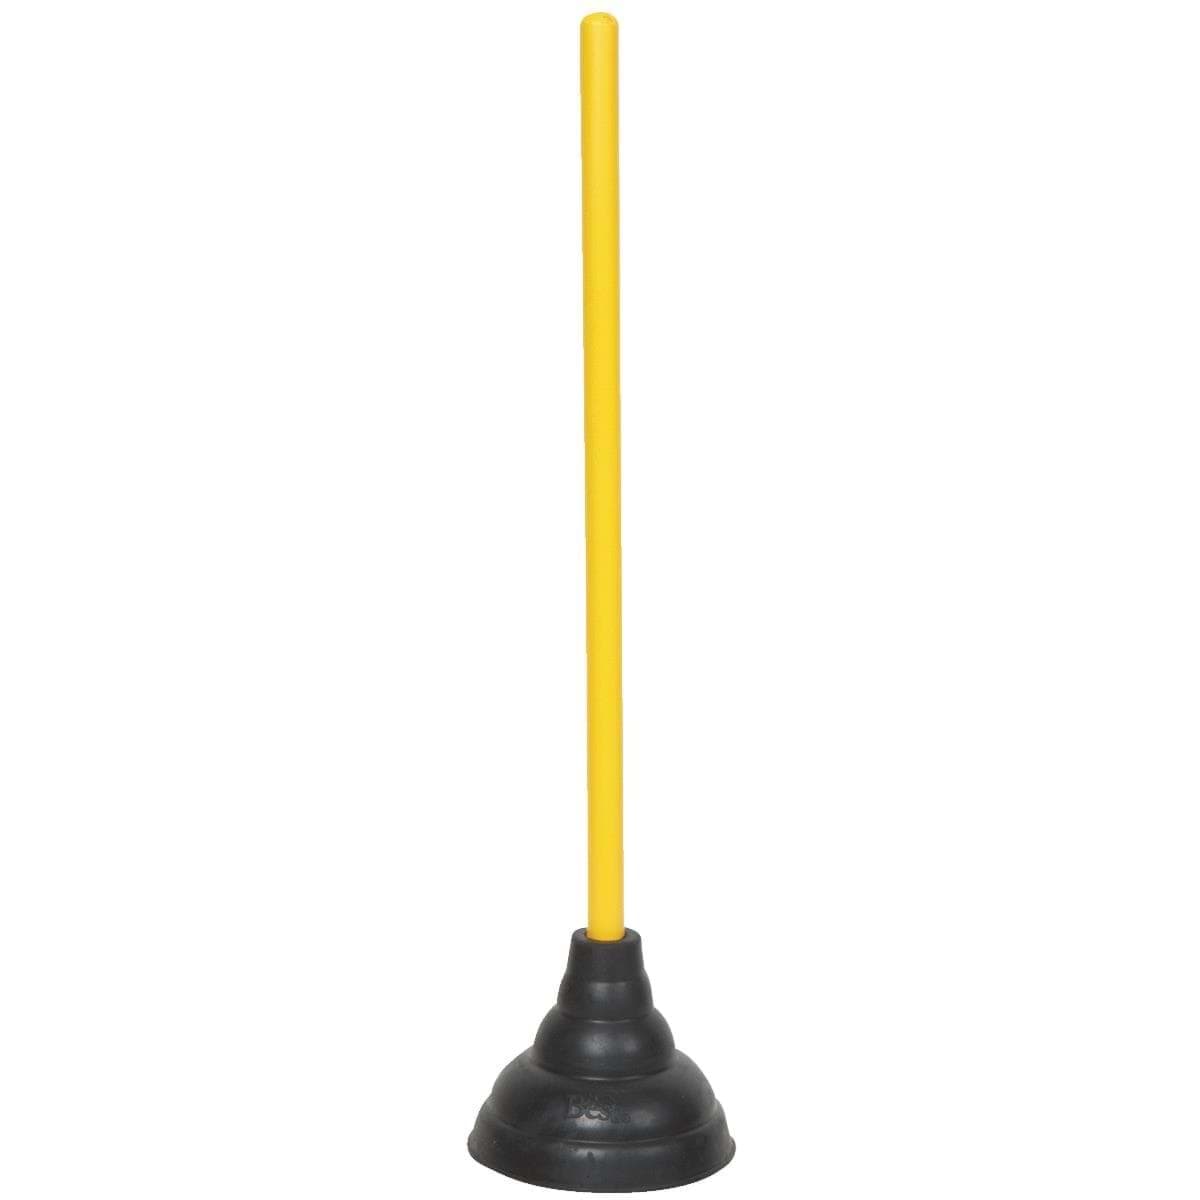 What Does A Plunger Look Like